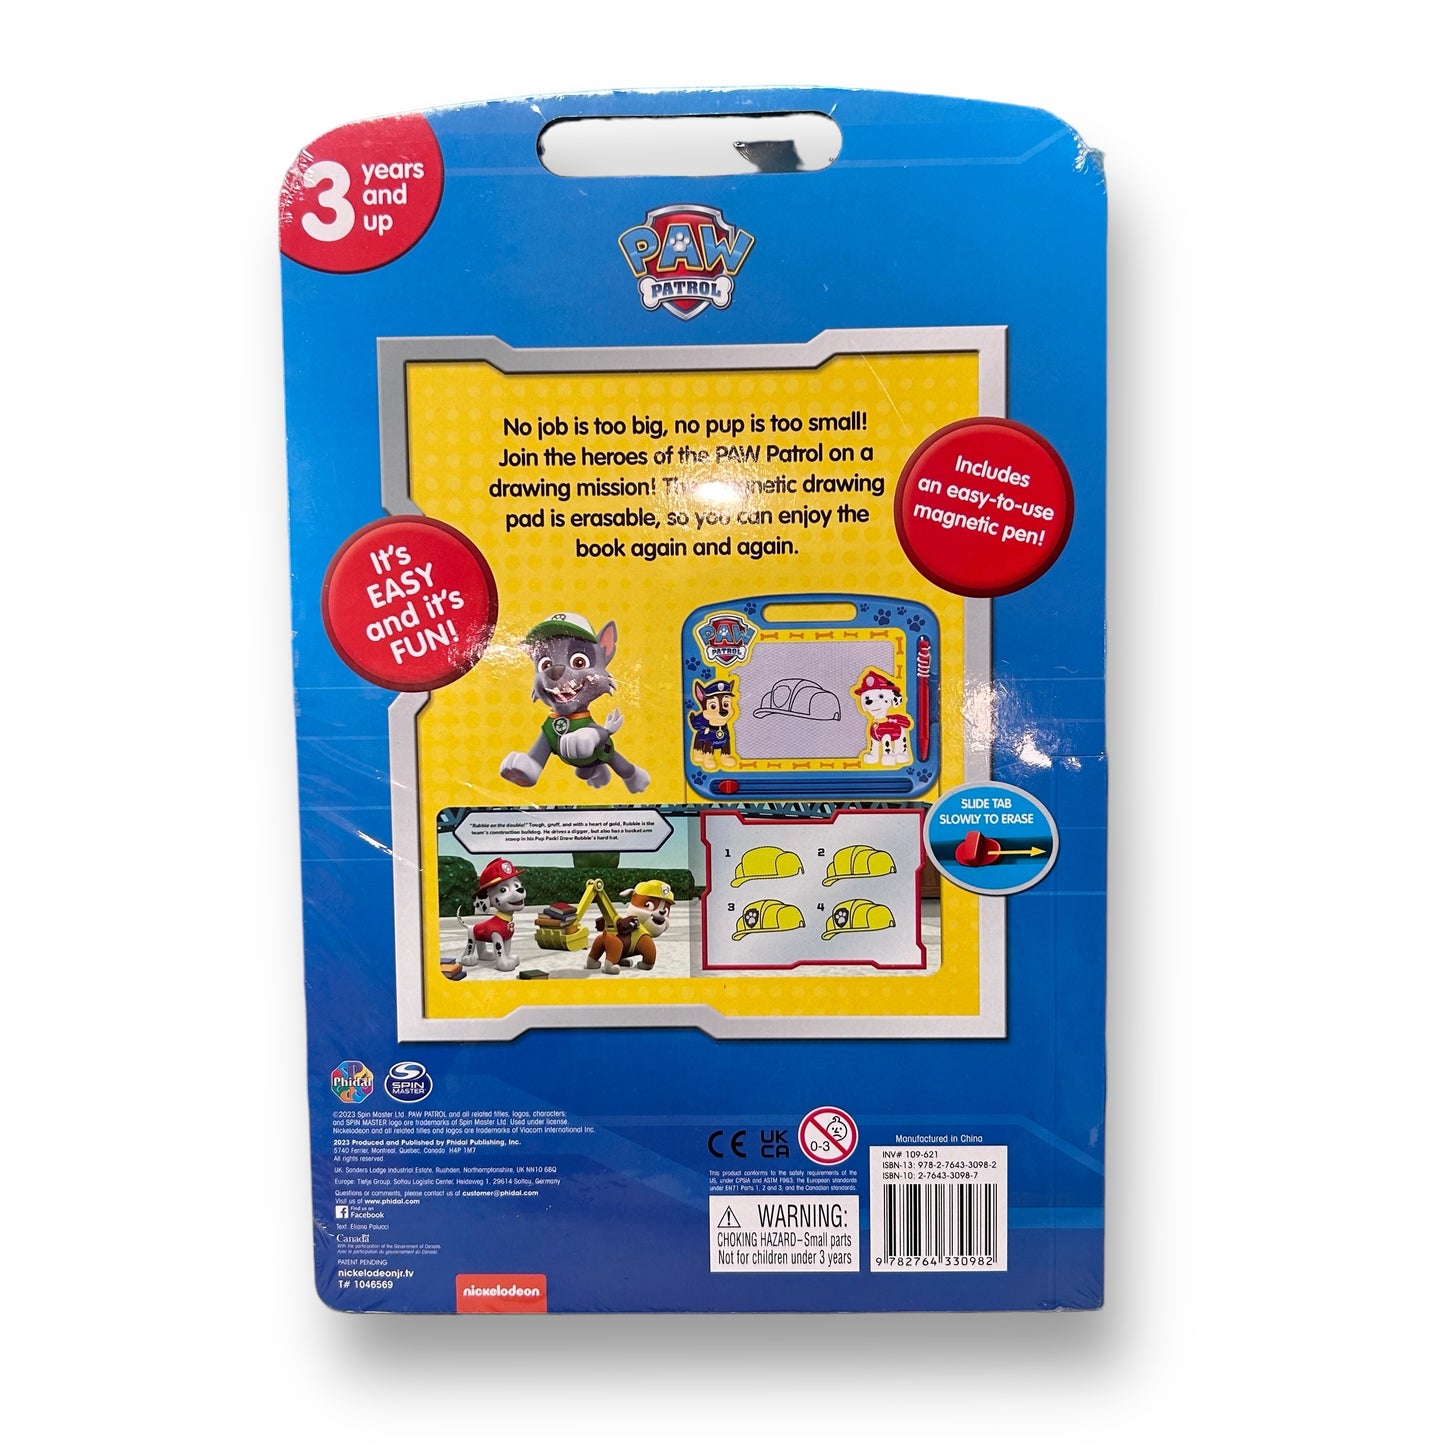 NEW! Paw Patrol Magnetic Drawing Pad & Story Book